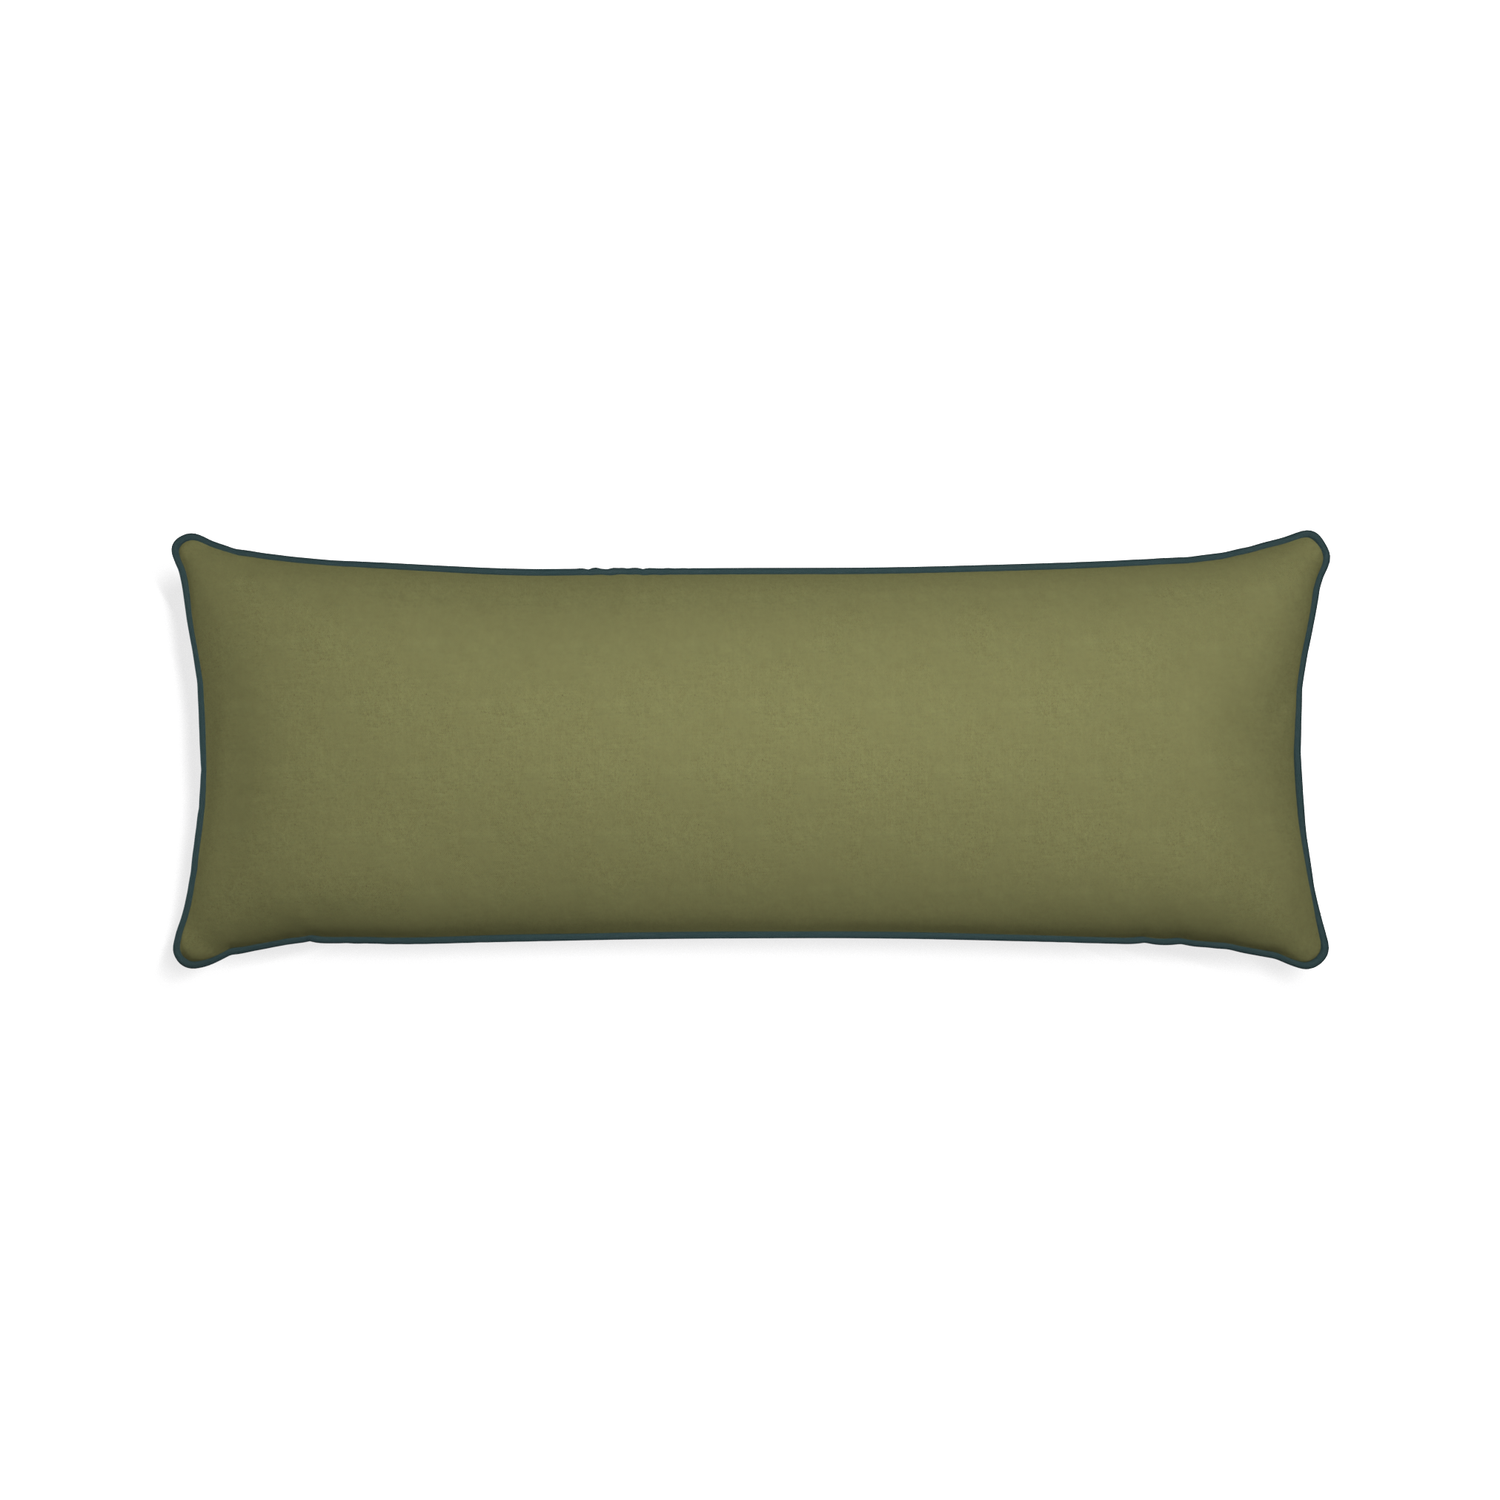 Xl-lumbar moss custom moss greenpillow with p piping on white background